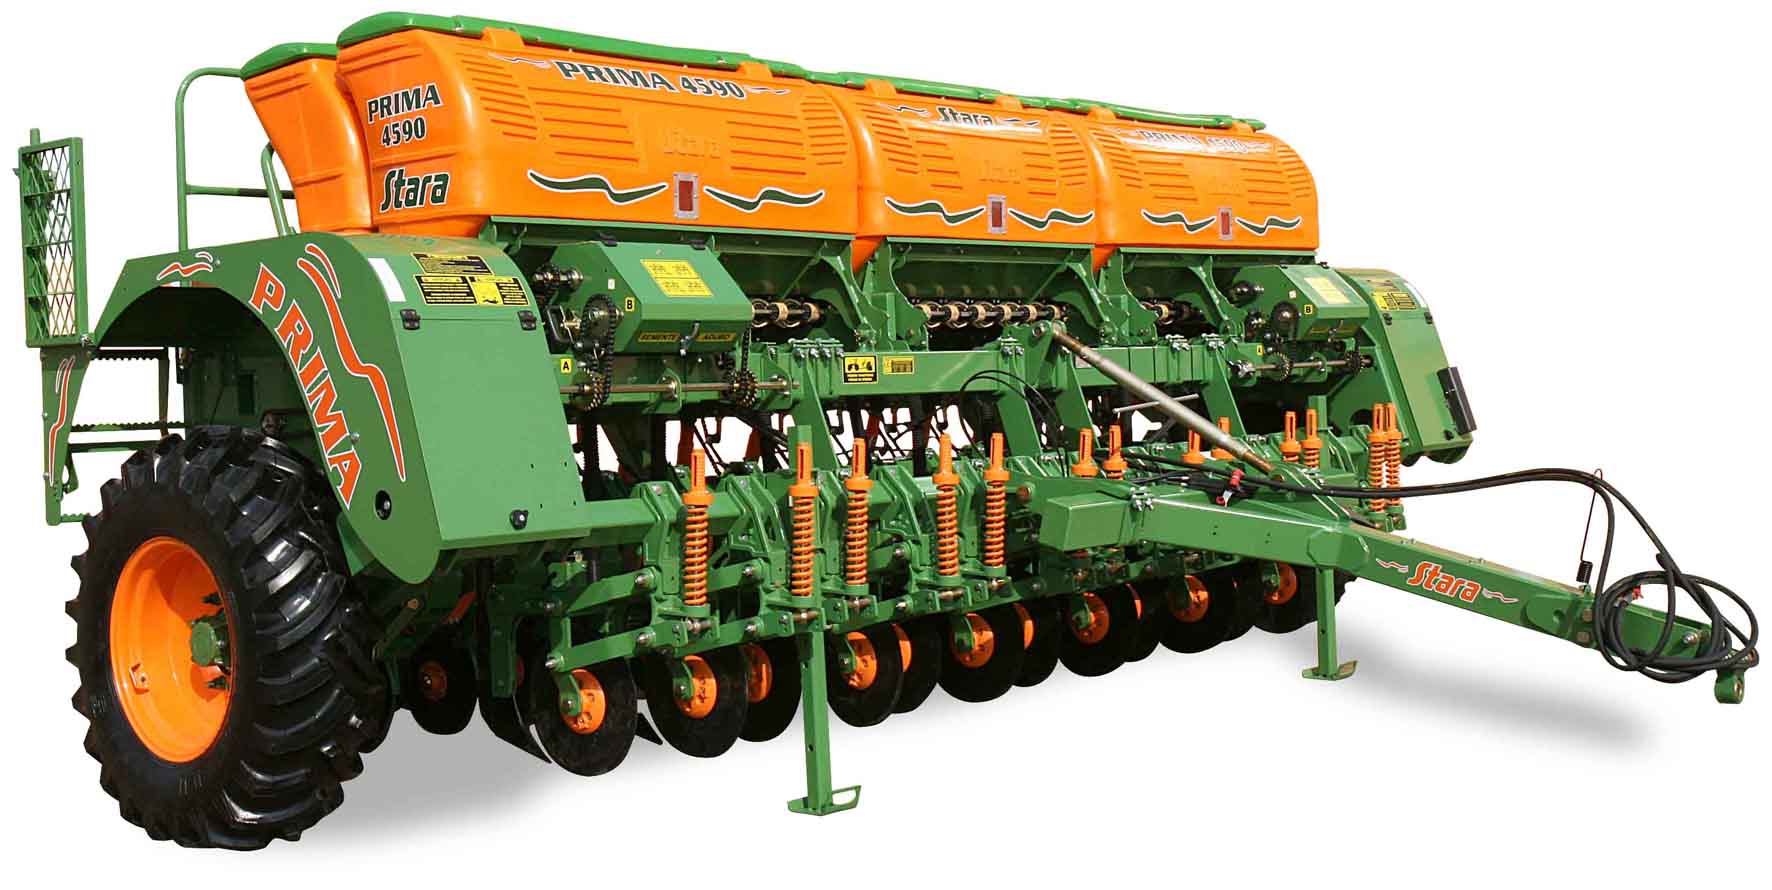 Bizon Is the First in Europe to Start the Sales of Stara Precision Seeders 